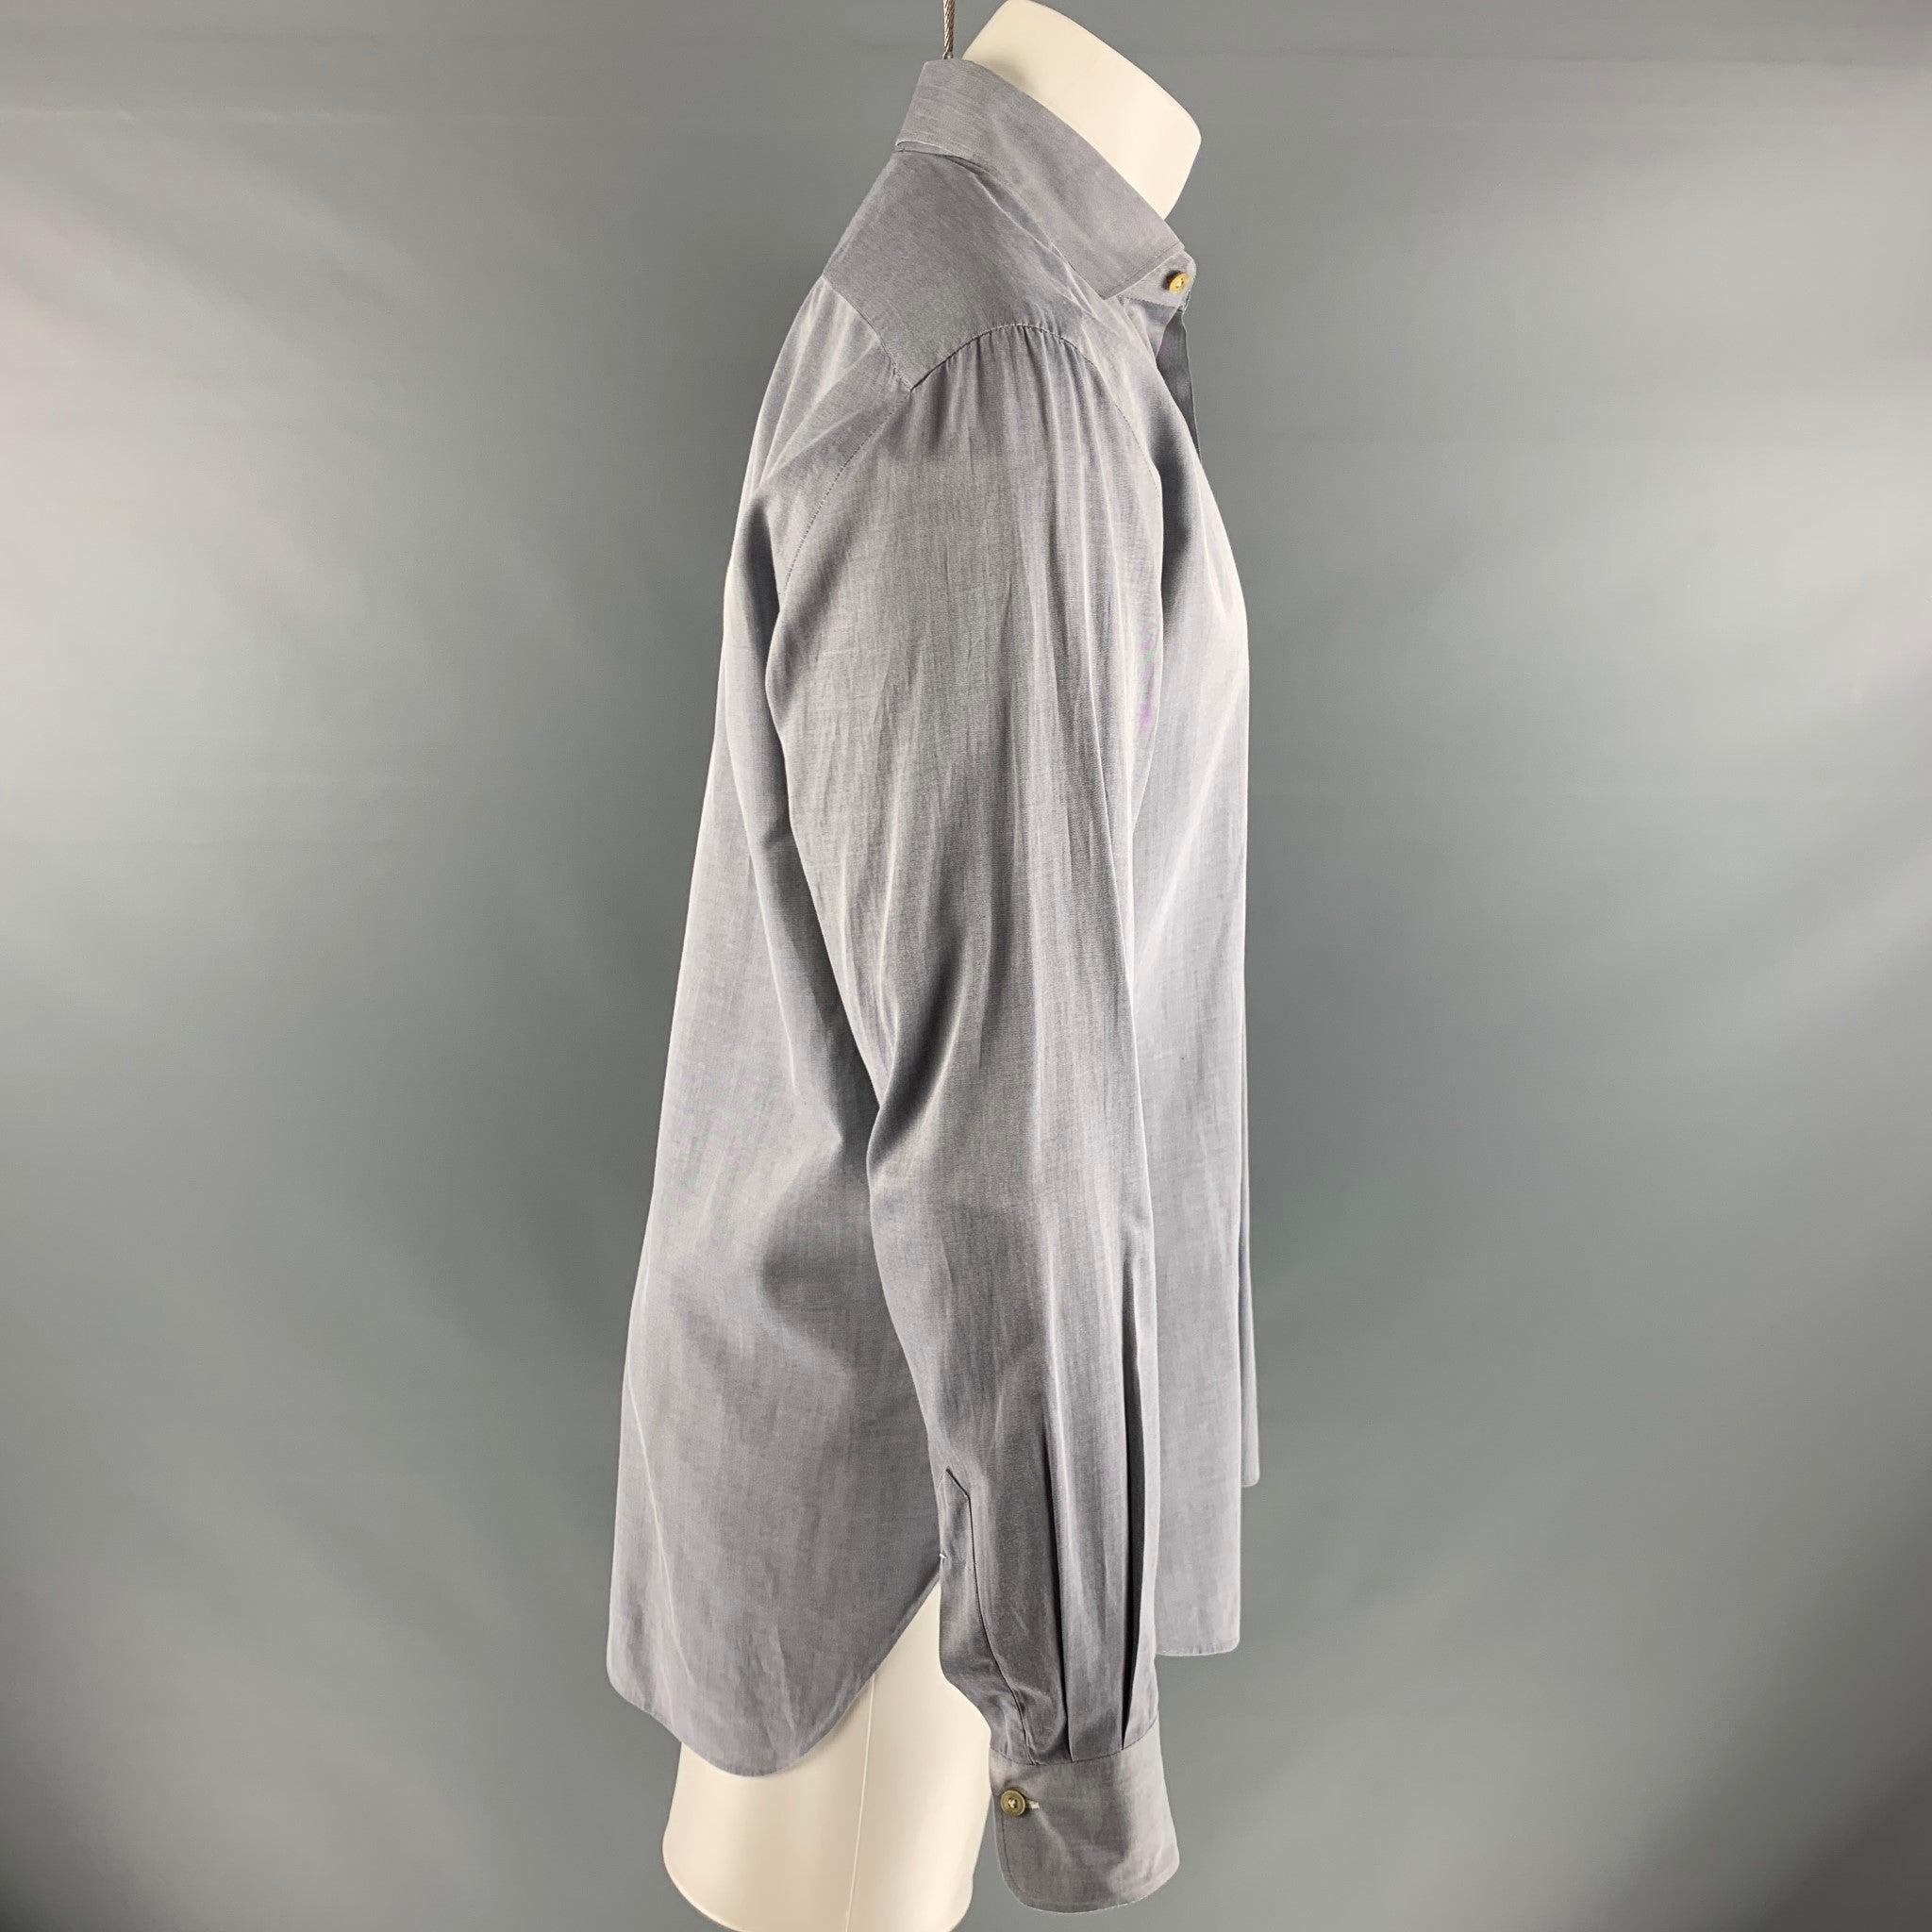 KITON long sleeve shirt comes in a grey 100% cotton featuring a spread collar and button down closure.
Made in Italy.Very Good Pre-Owned Condition. 

Marked:   15 3/4 & 40 

Measurements: 
 
Shoulder: 18 inches Chest: 42 inches Sleeve: 26 inches